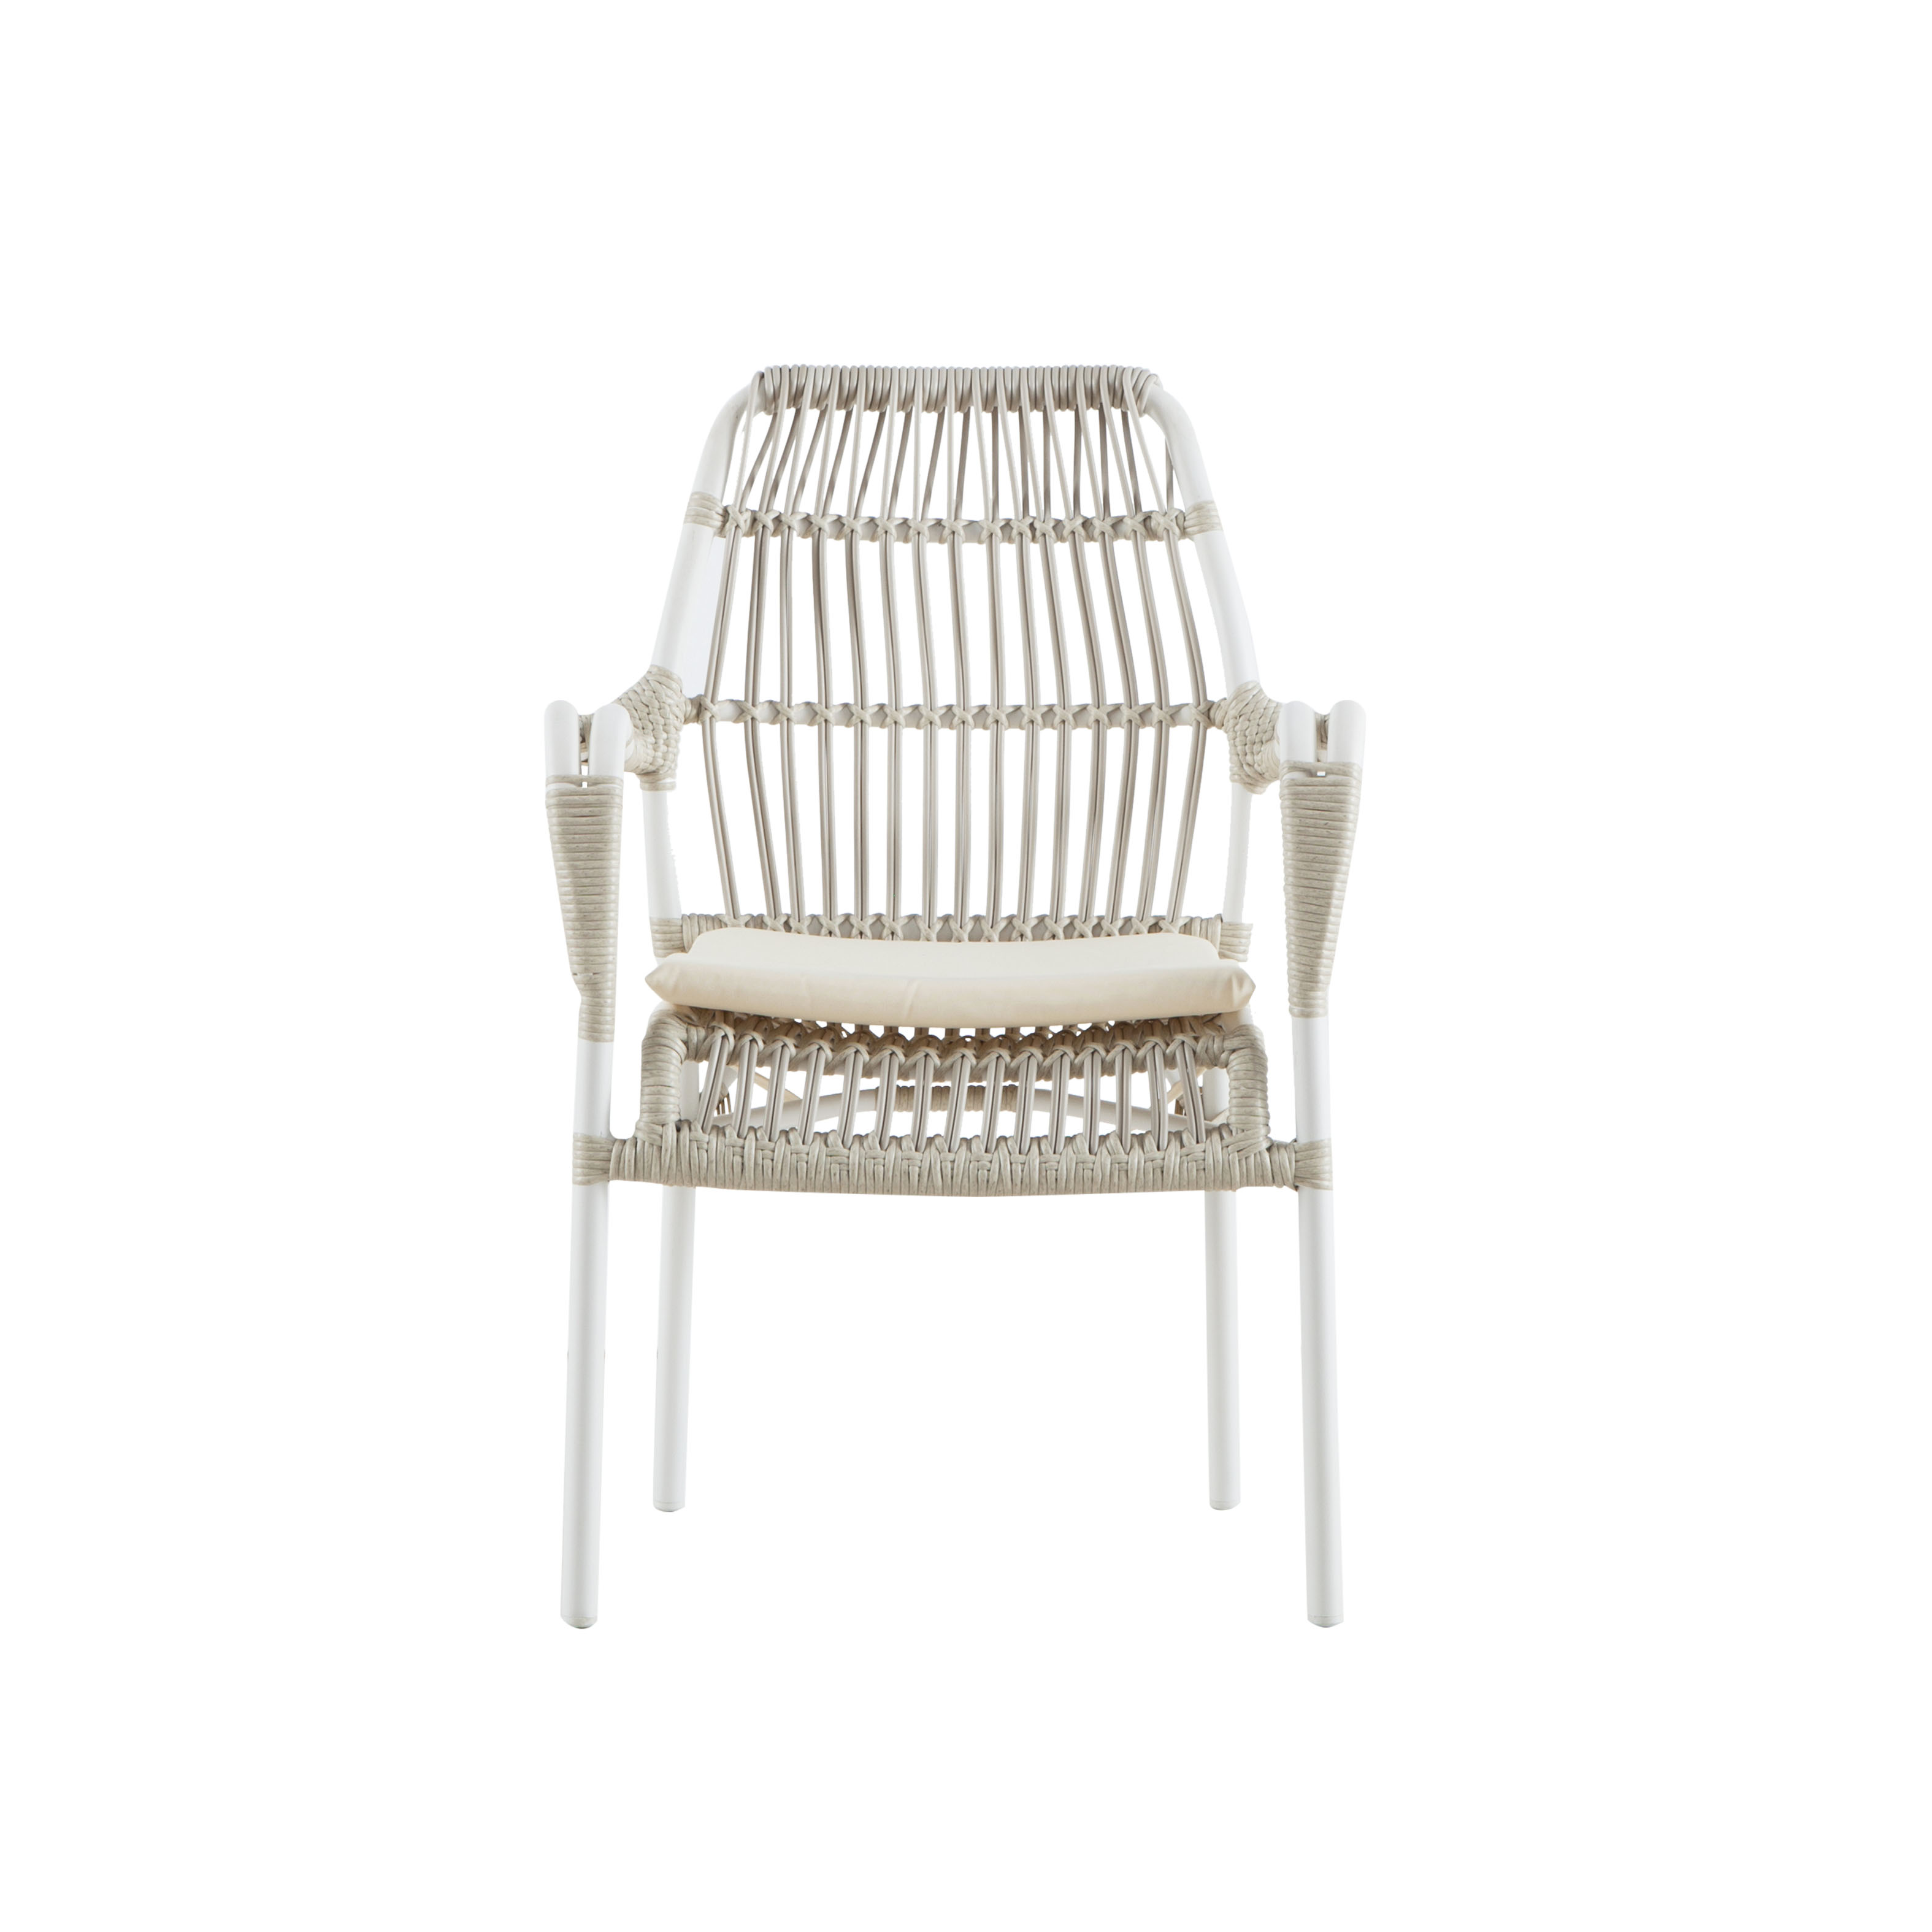 Poetry rattan dining chair S2